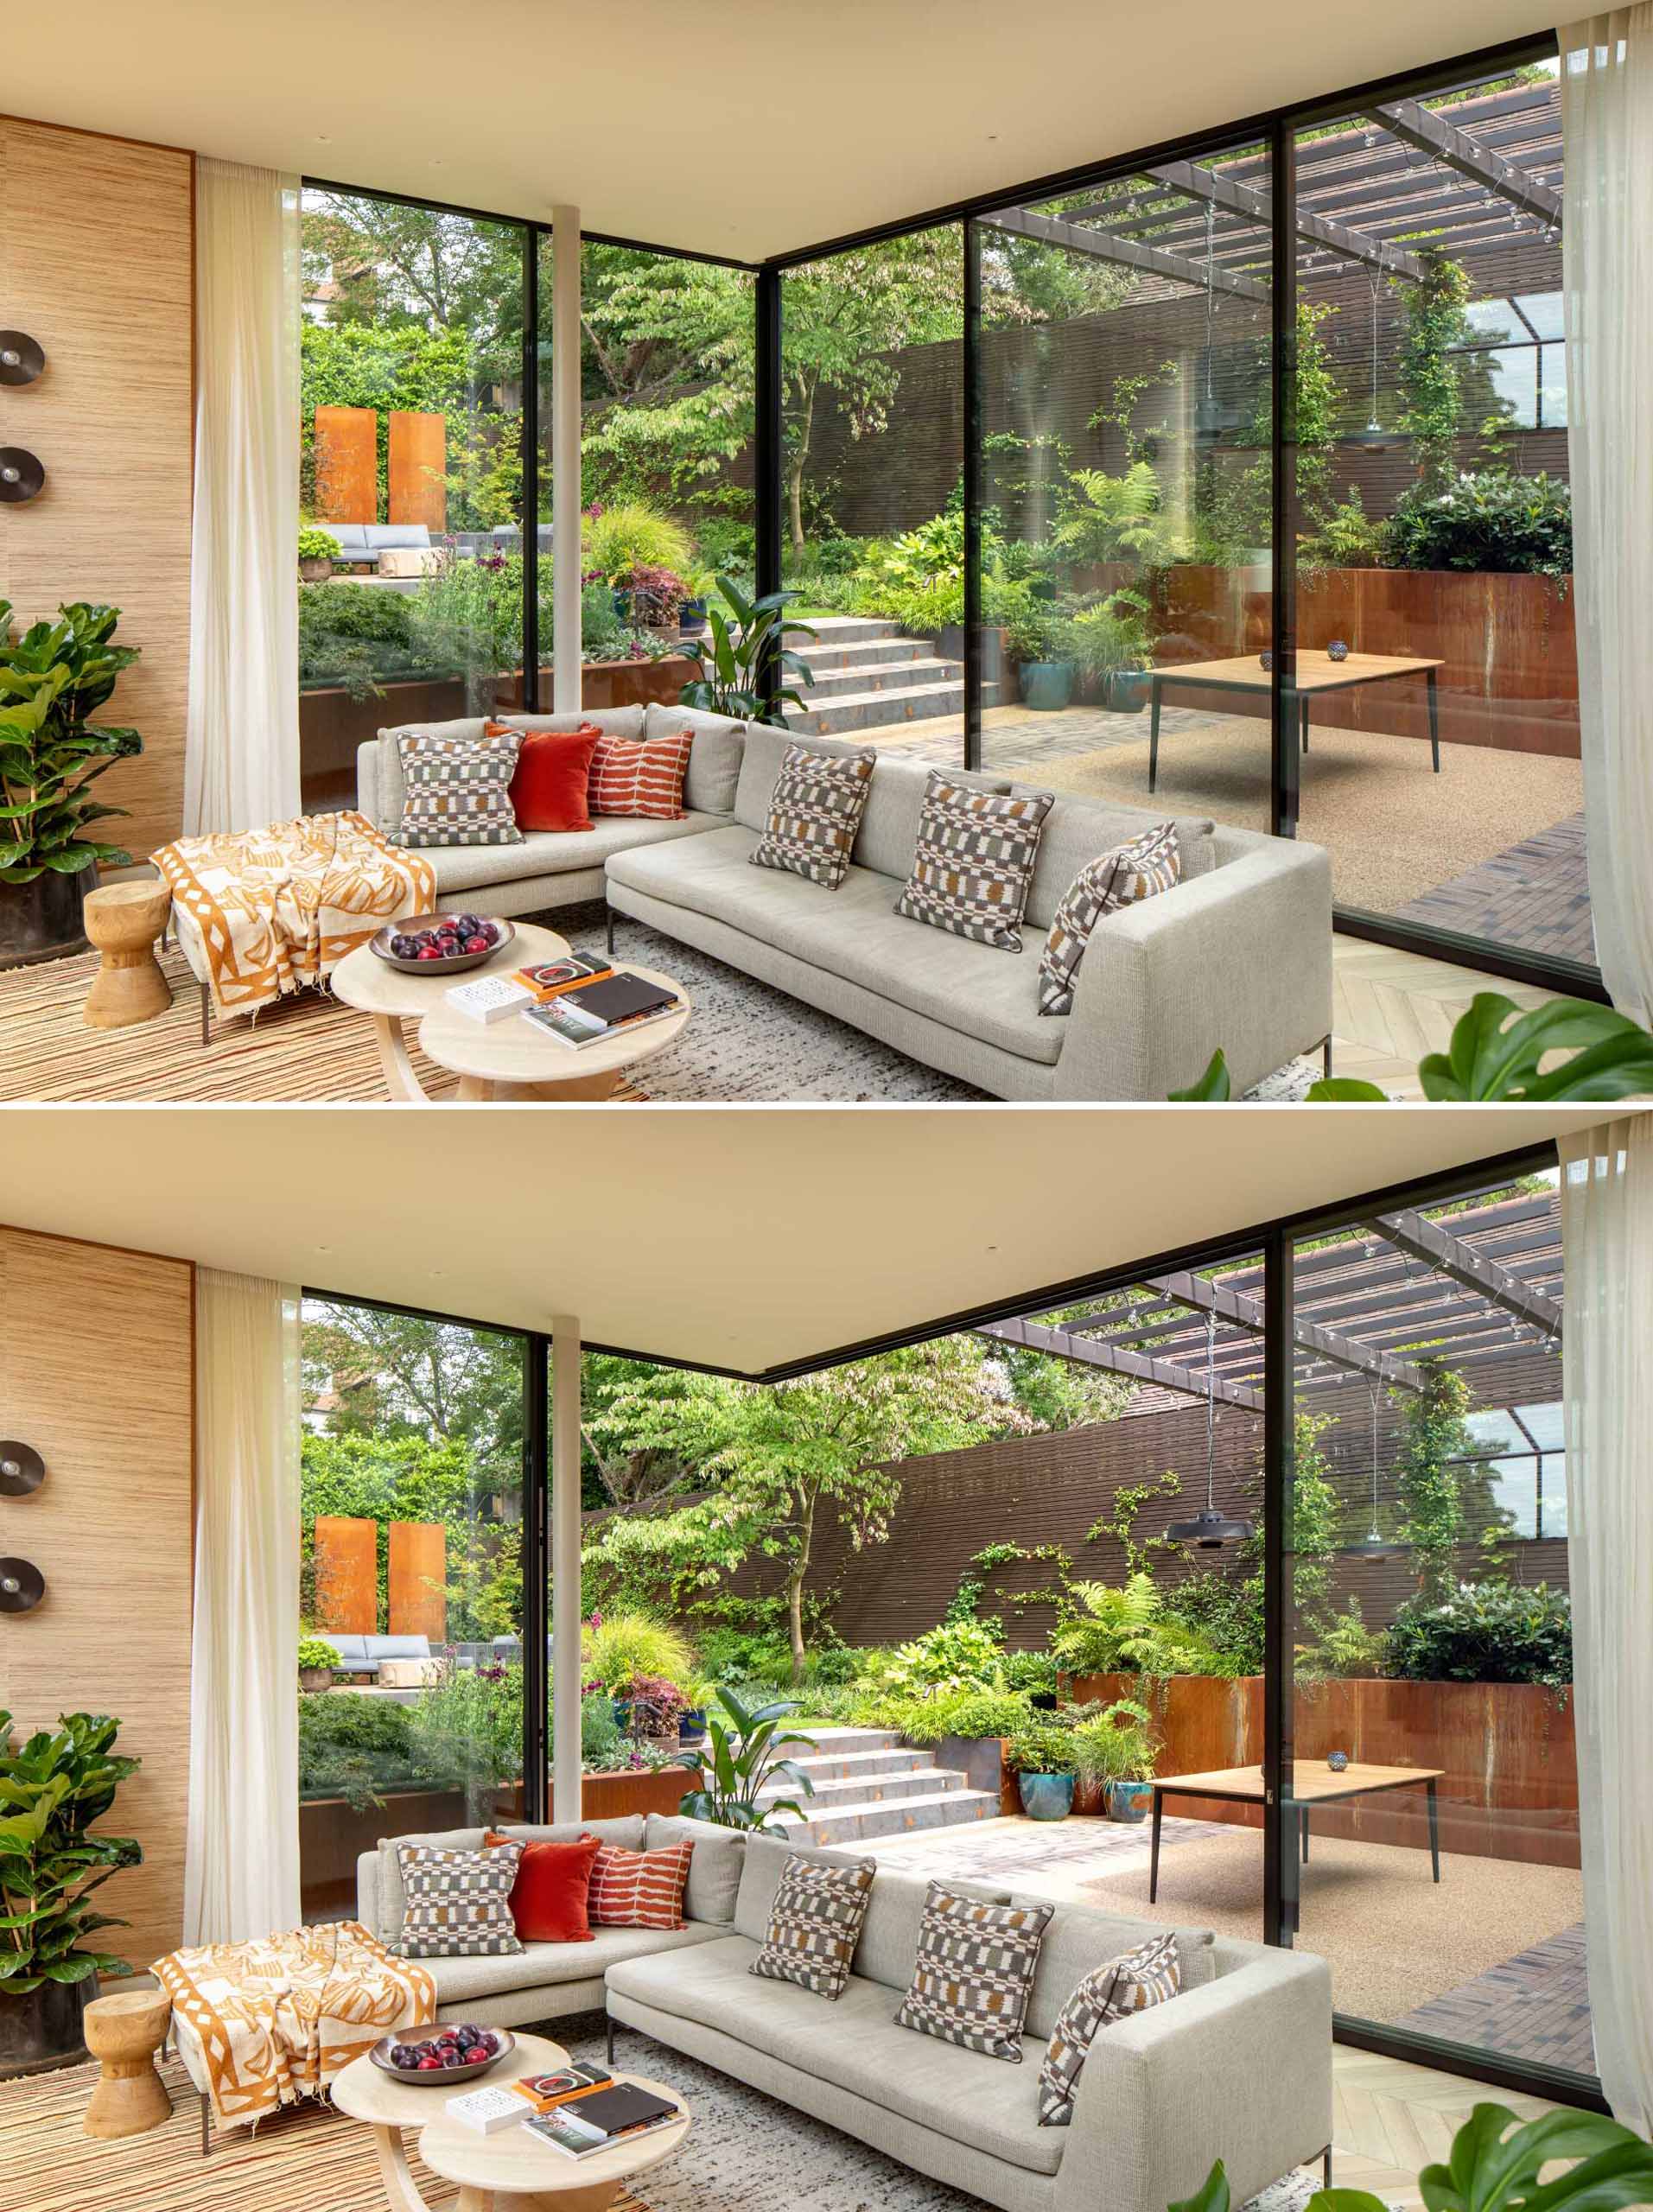 The house wraps around an outside dining space which then leads up a few steps into the landscaped garden with evergreen plants. Sliding glass walls open the living room to this outdoor space while allowing natural light to flood the interior.